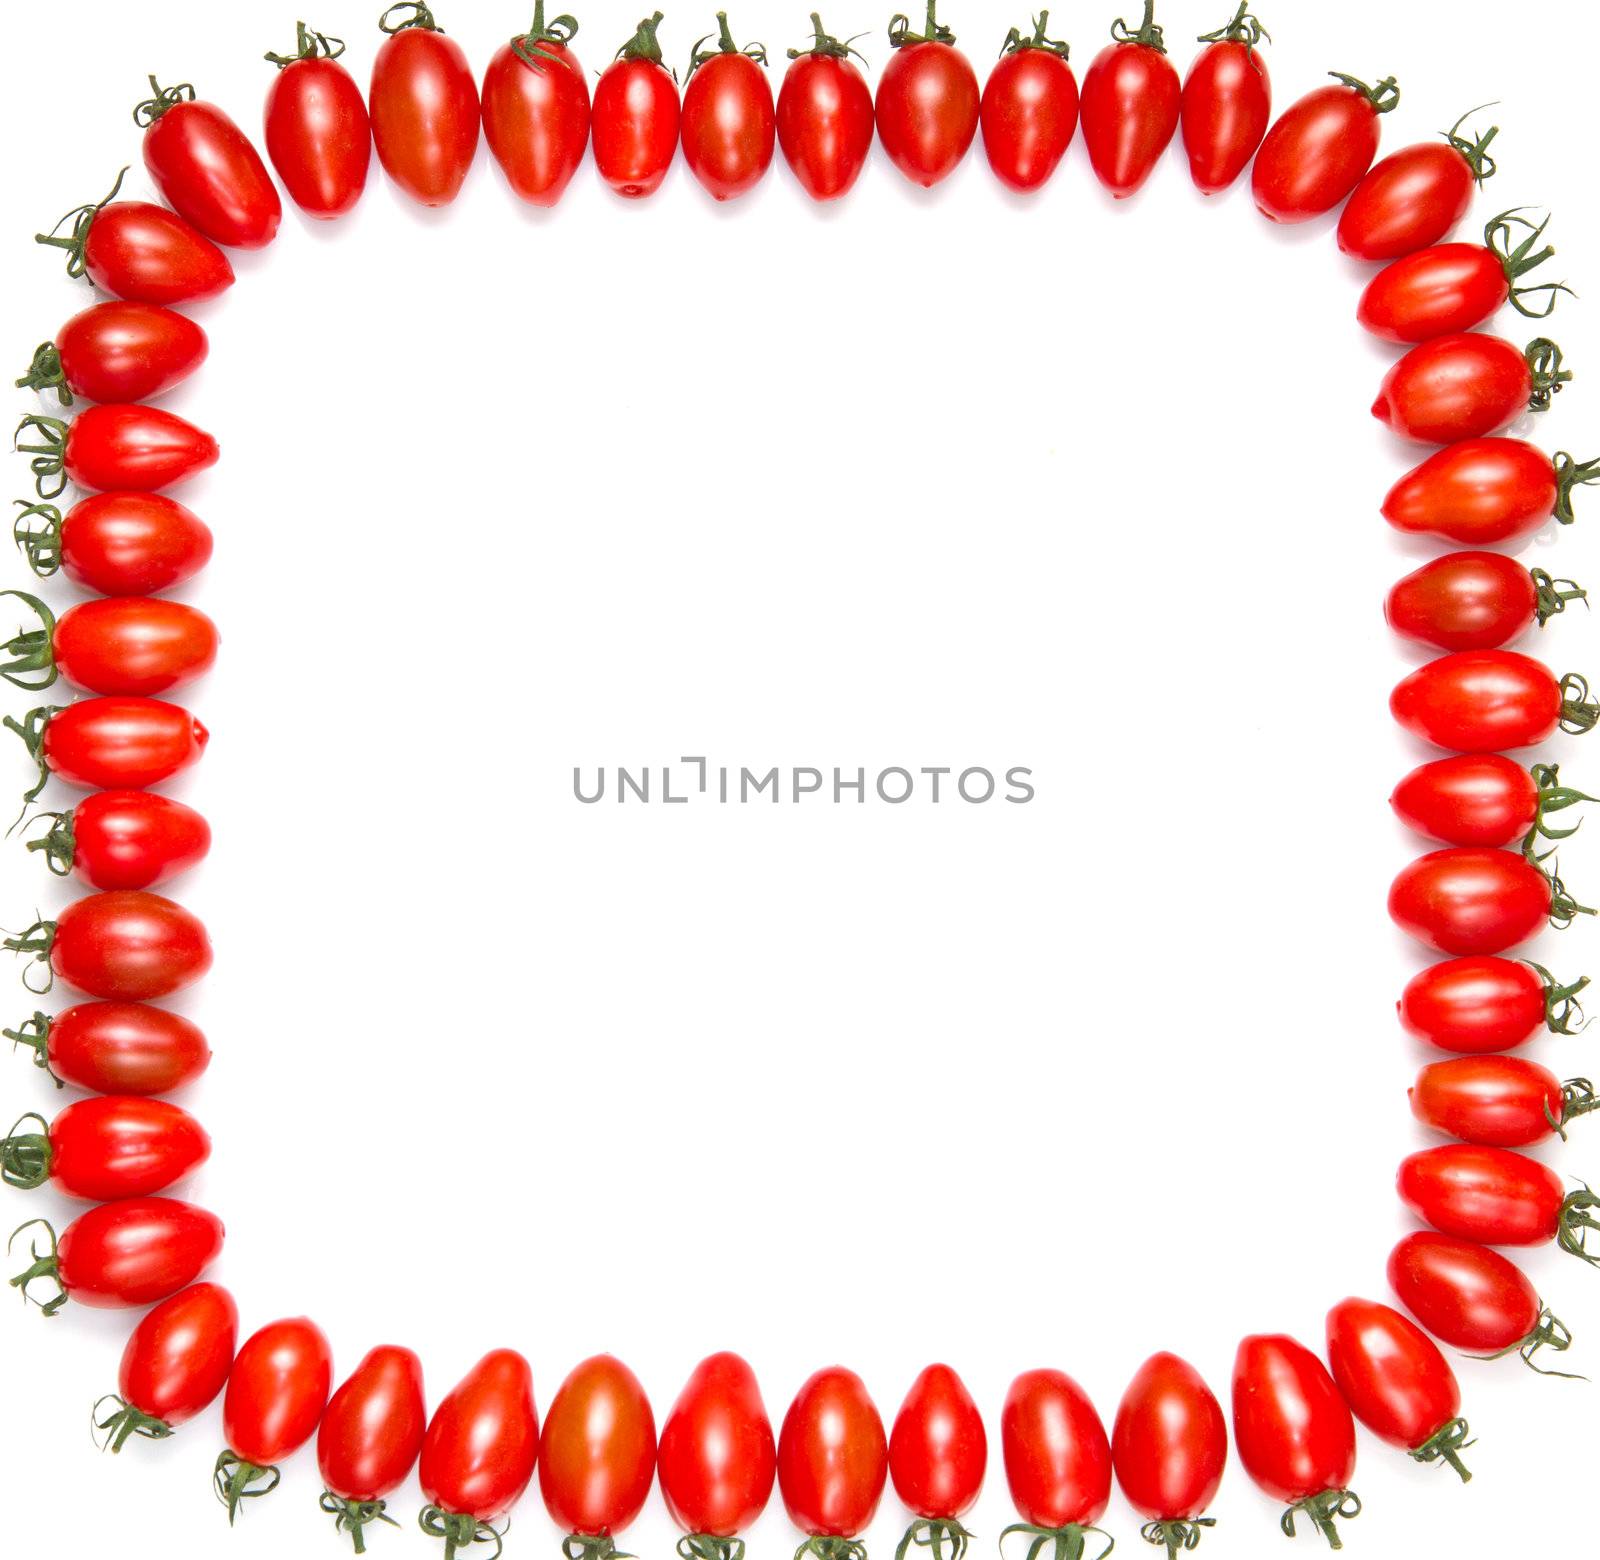 frame of red tomatoes isolated on a white background  by lsantilli